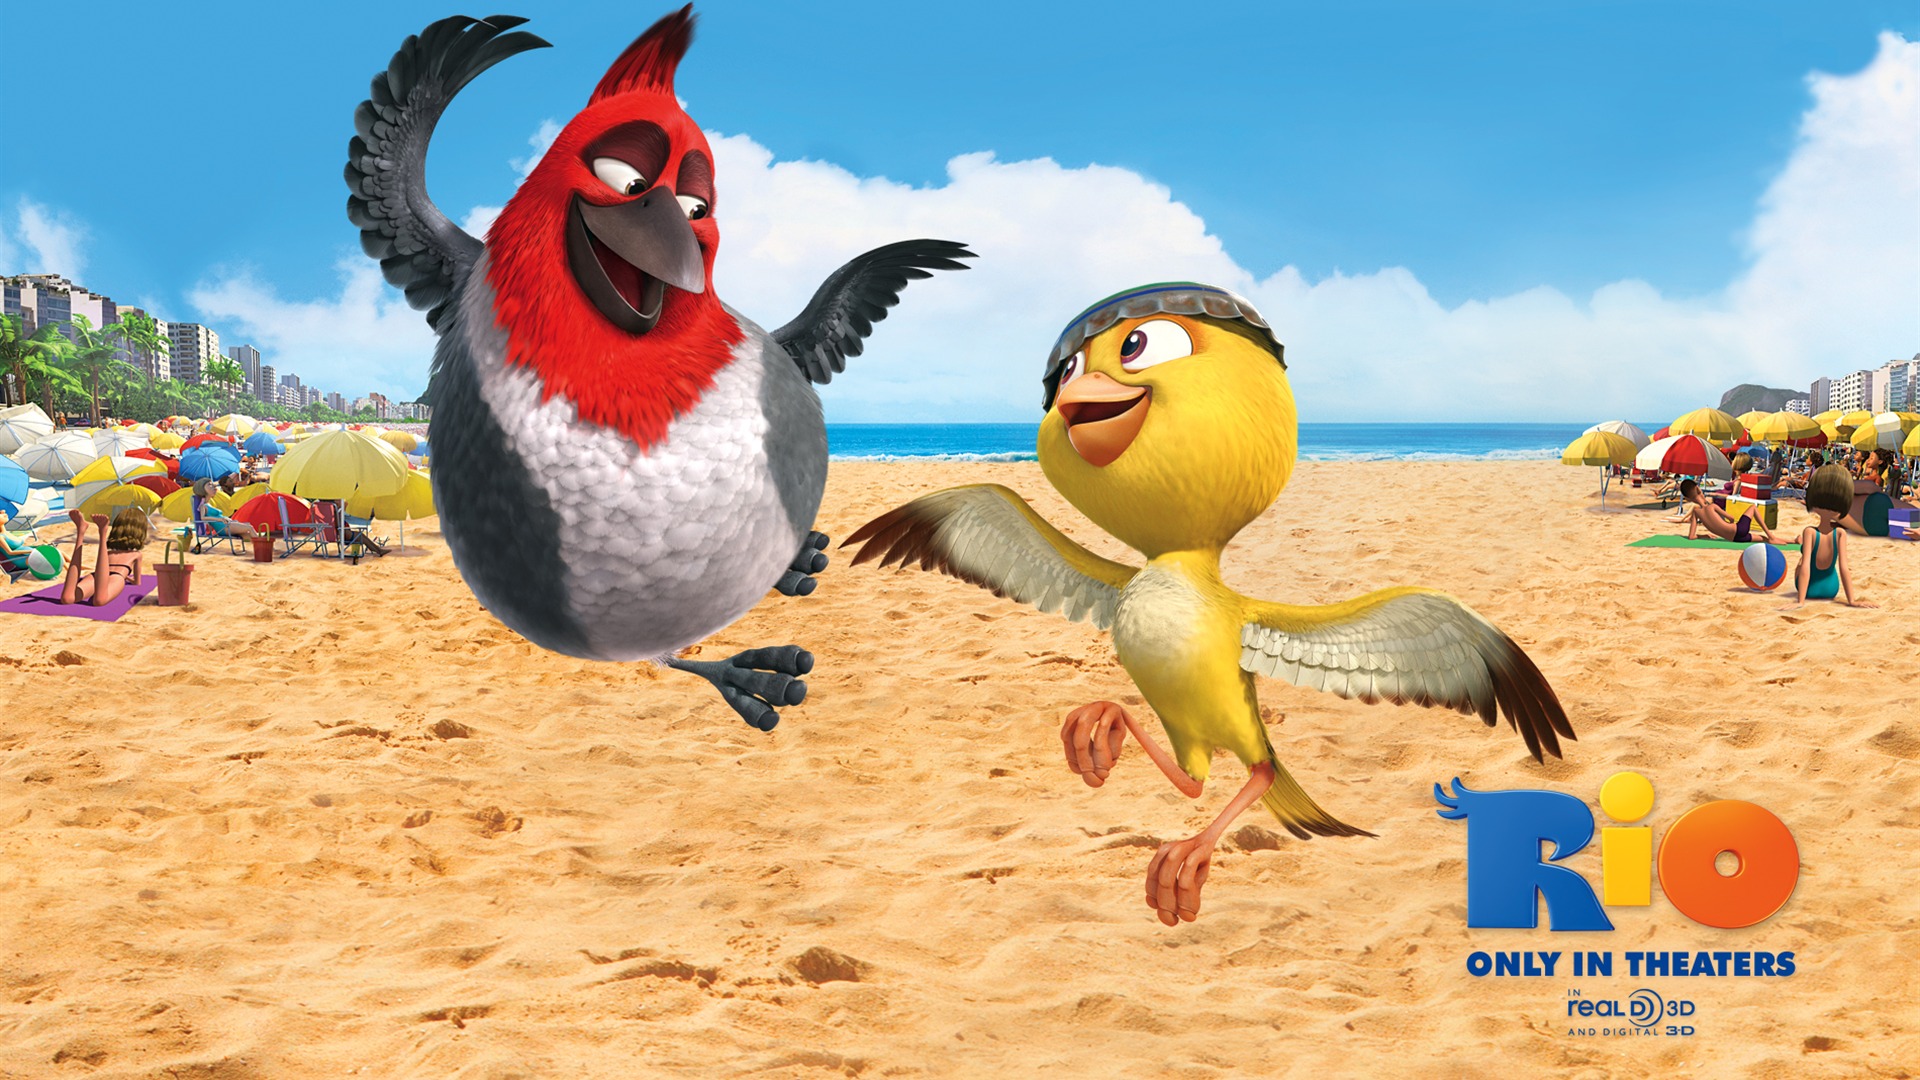 Rio 2011 wallpapers #15 - 1920x1080